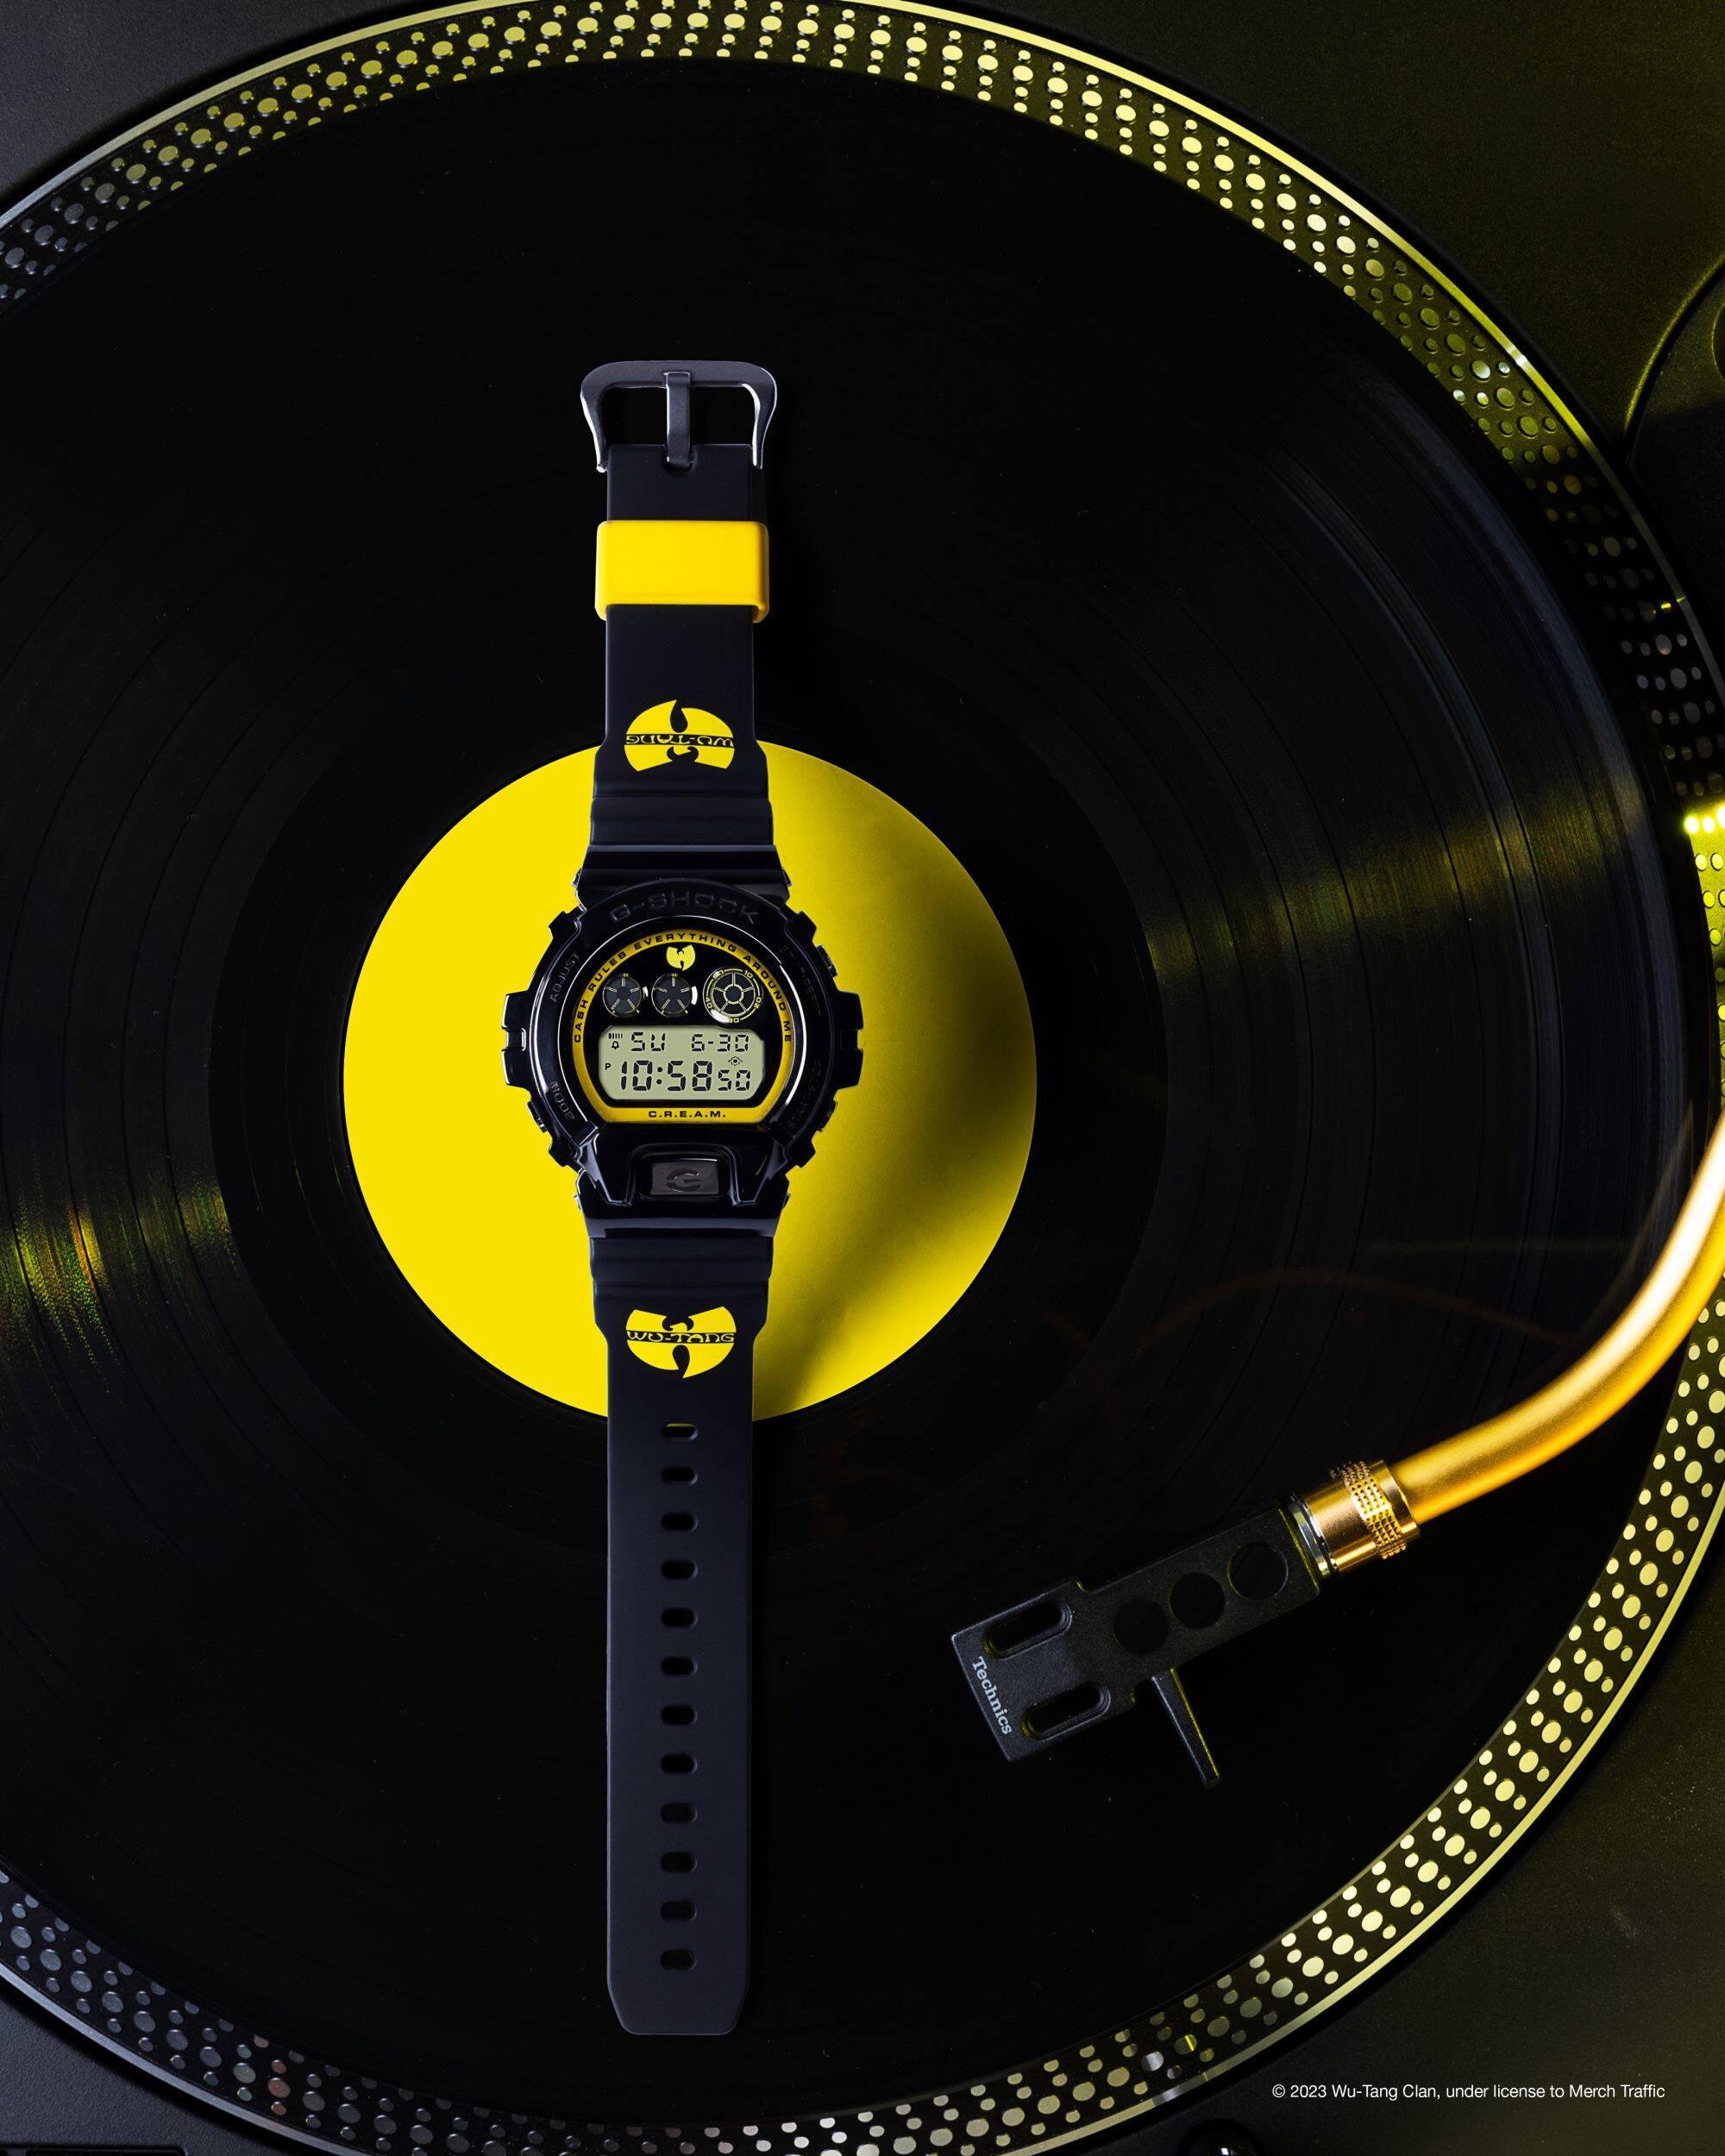 Wu-Tang watch laid flat on top of a vinyl record & record player